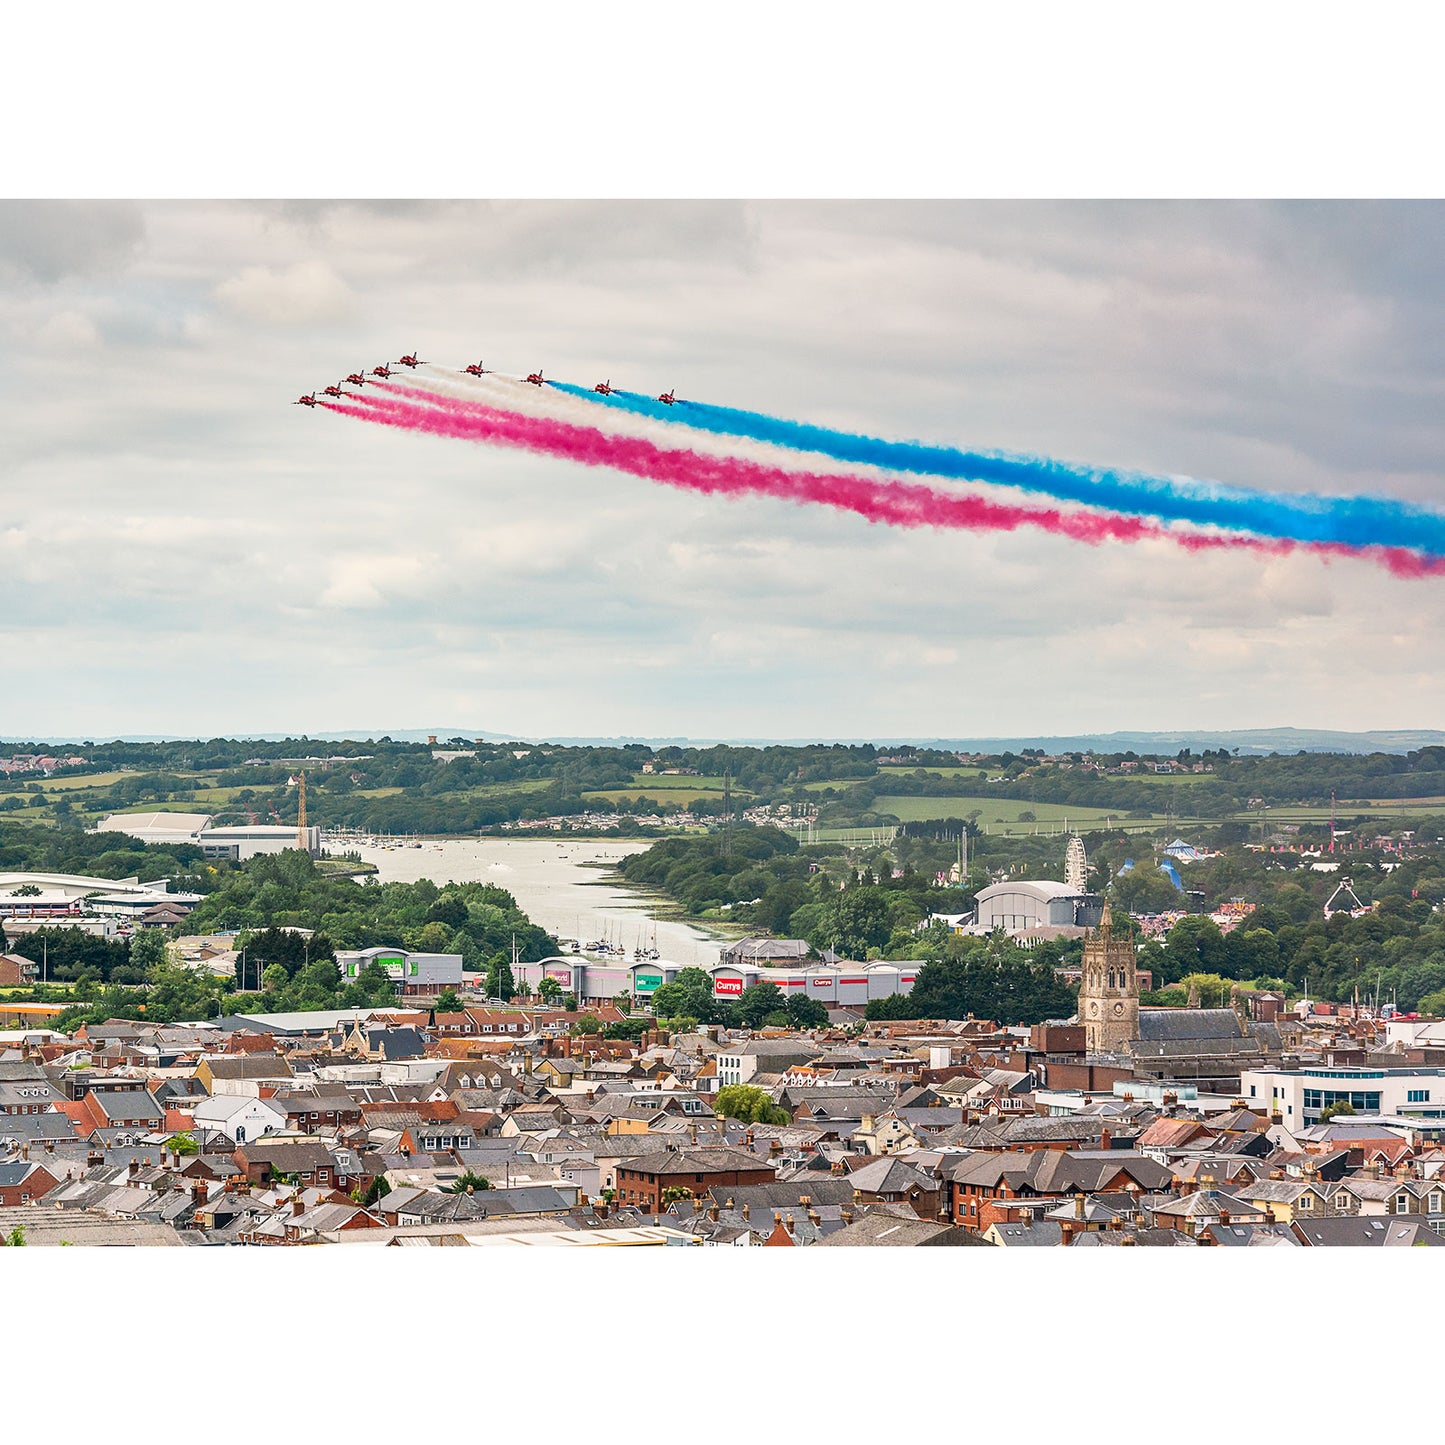 The Red Arrows, Isle of Wight Festival